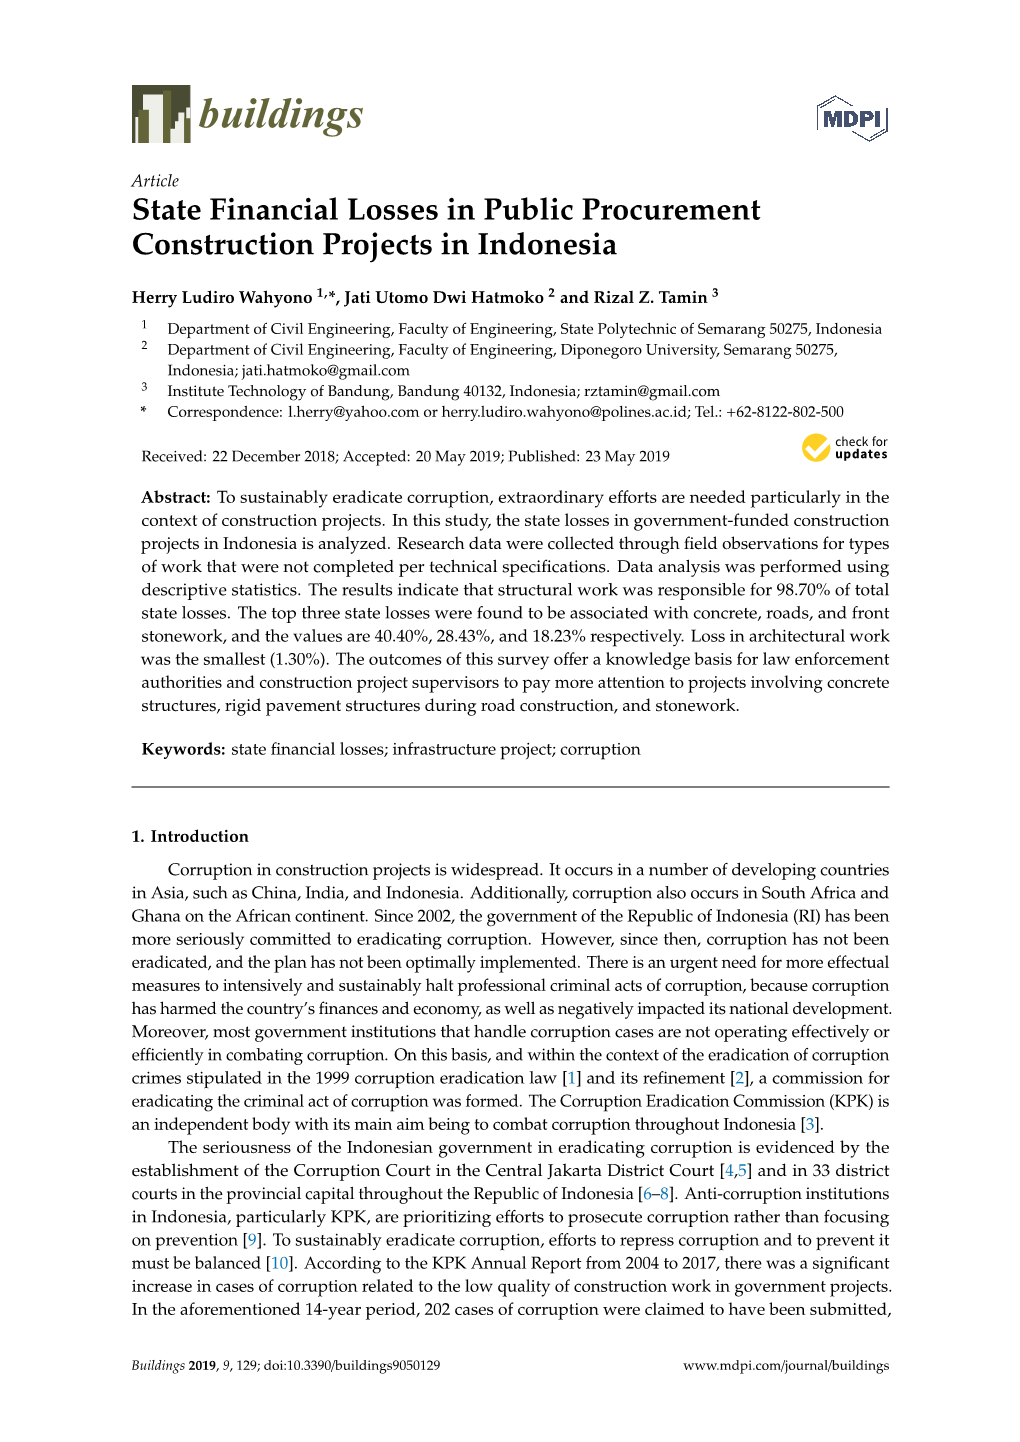 State Financial Losses in Public Procurement Construction Projects in Indonesia